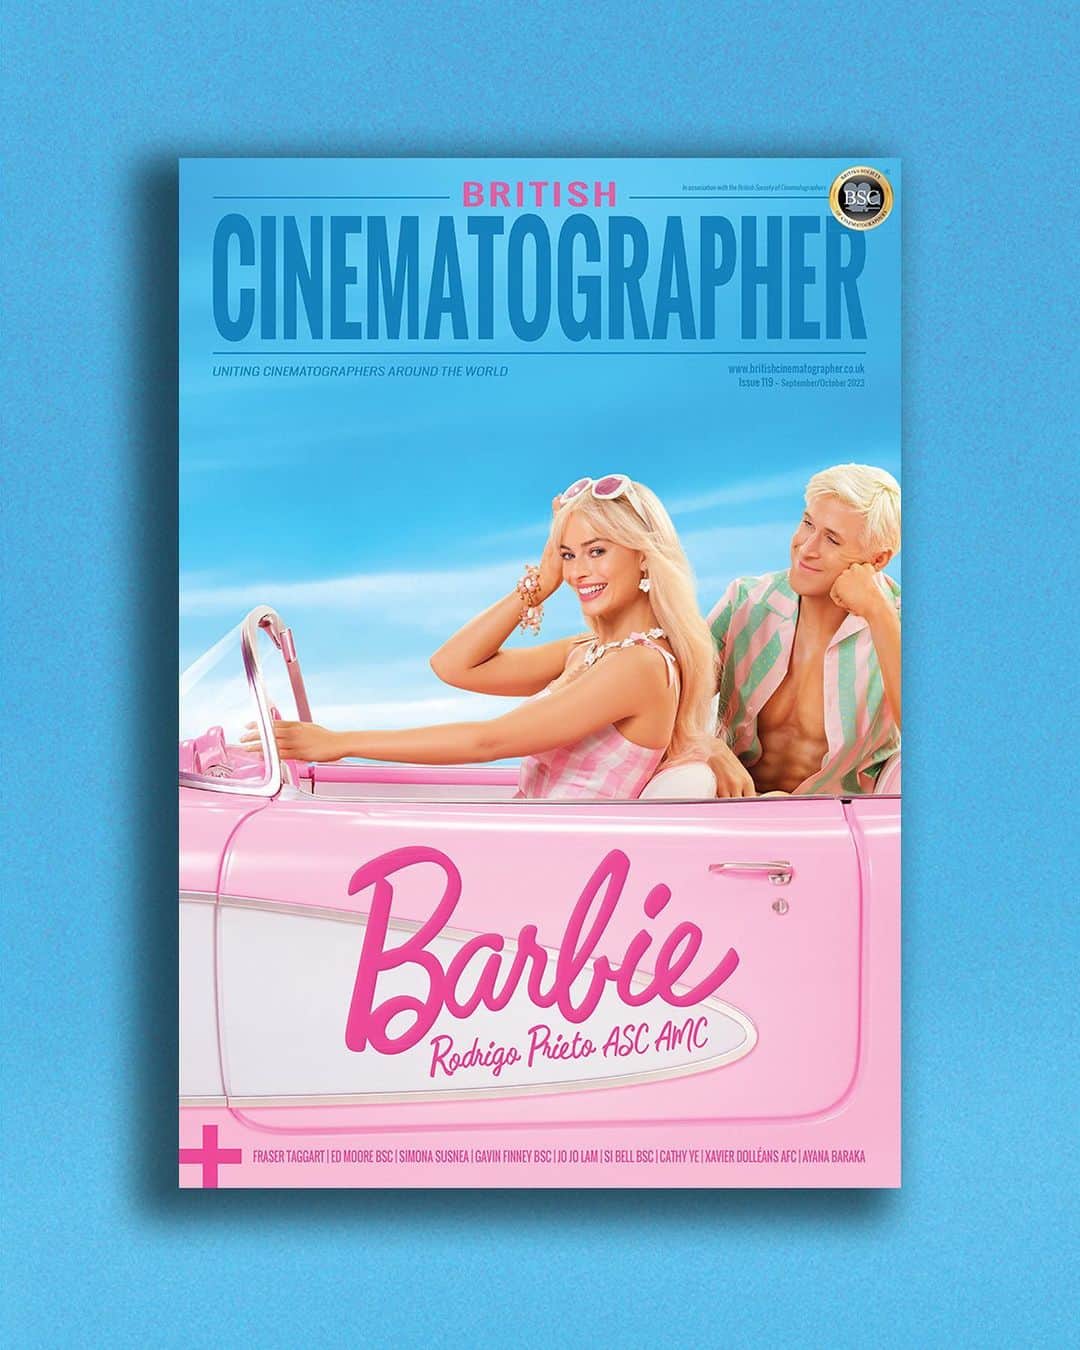 ロドリゴ・プリエトさんのインスタグラム写真 - (ロドリゴ・プリエトInstagram)「Hi Barbie!   The September/October issue of British Cinematographer is now here! We’re delighted to reveal that #Barbie is our cover story special.  We’ve gone behind the scenes at the Barbie Dreamhouse (or the Mojo Dojo Casa House, if you prefer) to find out how cinematographer Rodrigo Prieto ASC AMC jumped at the chance to make Greta Gerwig’s vision of “authentic artificiality” a reality.   Prieto shares his approach to framing in Barbie Land, helping Gerwig transition to shooting digitally, and his emblematic choice of colour palette.   ELSEWHERE IN THE ISSUE...  Fraser Taggart on Mission: Impossible - Dead Reckoning Part One  Special Feature: Strike Action  Our Tech-Nique section goes deep on AI  The second part of our diversity and inclusion The Bigger Picture special continues  Meet the New Wave: Olan Collardy  Gavin Finney BSC talks Good Omens S2  Ed Moore BSC chats Hijack  Simona Susnea fills us in on Heartstopper S2  Si Bell BSC takes us BTS on The Woman in the Wall  Our latest In The Frame profile is German gaffer Thorsten Kosellek.  As well as entertaining readers with his latest Letter From America, Steven Poster ASC is also the star of this issue’s Visionary feature.   Hear from more DPs on their latest and greatest projects, including Cathy Ye on Bone Black and Jo Jo Lam on Playland.  Our latest Masterclass sees Xavier Dolléans AFC share his innovative use of the AGITO for Marinette.  DP Ayana Baraka peels back the curtain on Alicia Keys’ She Is The Music (SITM) songwriting camp in this month’s Music in Motion.  Delve into the extraordinary career of Kubrick collaborator John Alcott BSC.  Look forward to the goings-on at September’s IBC and see if you can spot yourself in our round-up of the BSC Summer Lunch.  Discover the Hollywood history of Litepanels.  There’s all the latest news and insight from the post-production sphere in Set to Post.  You can also read about the latest news and industry happenings from GBCT, IMAGO, and more!」9月7日 19時51分 - rpstam